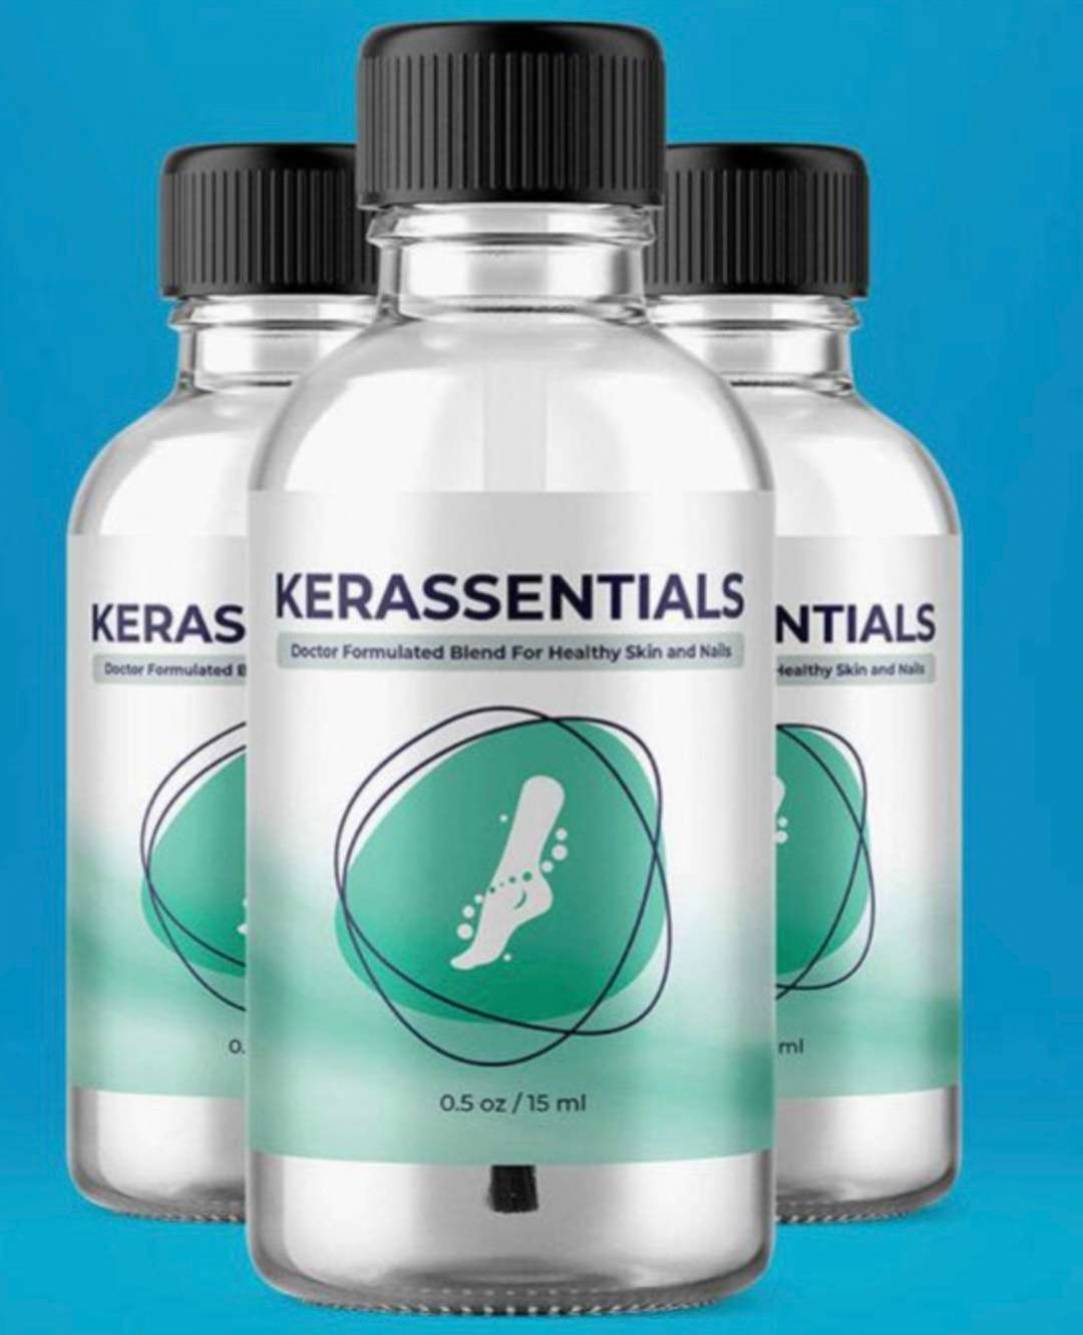 Kerassentials Reviews A Better Solution For Nail Infection